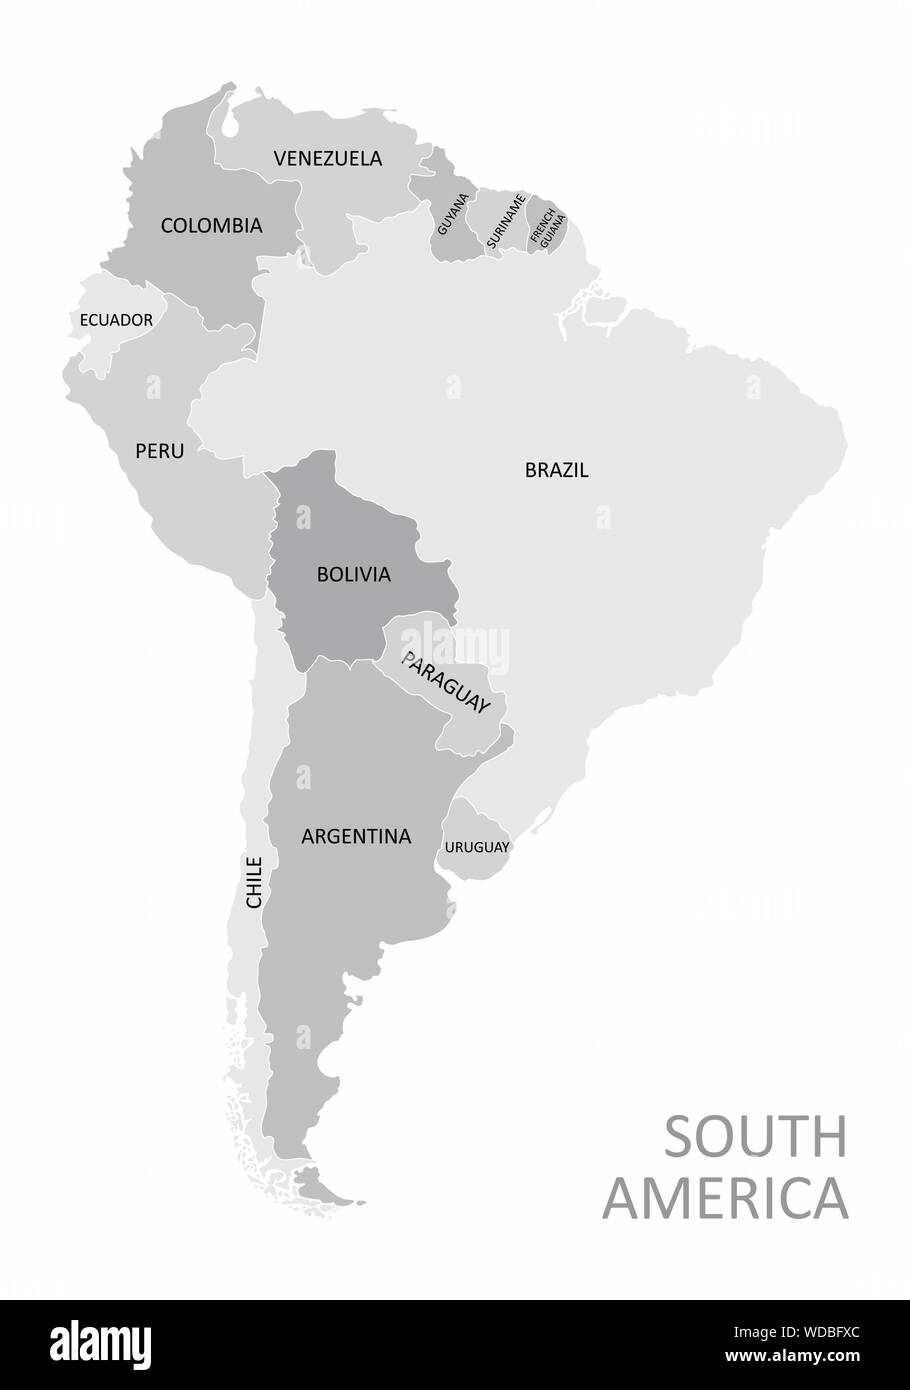 South America map Stock Vector